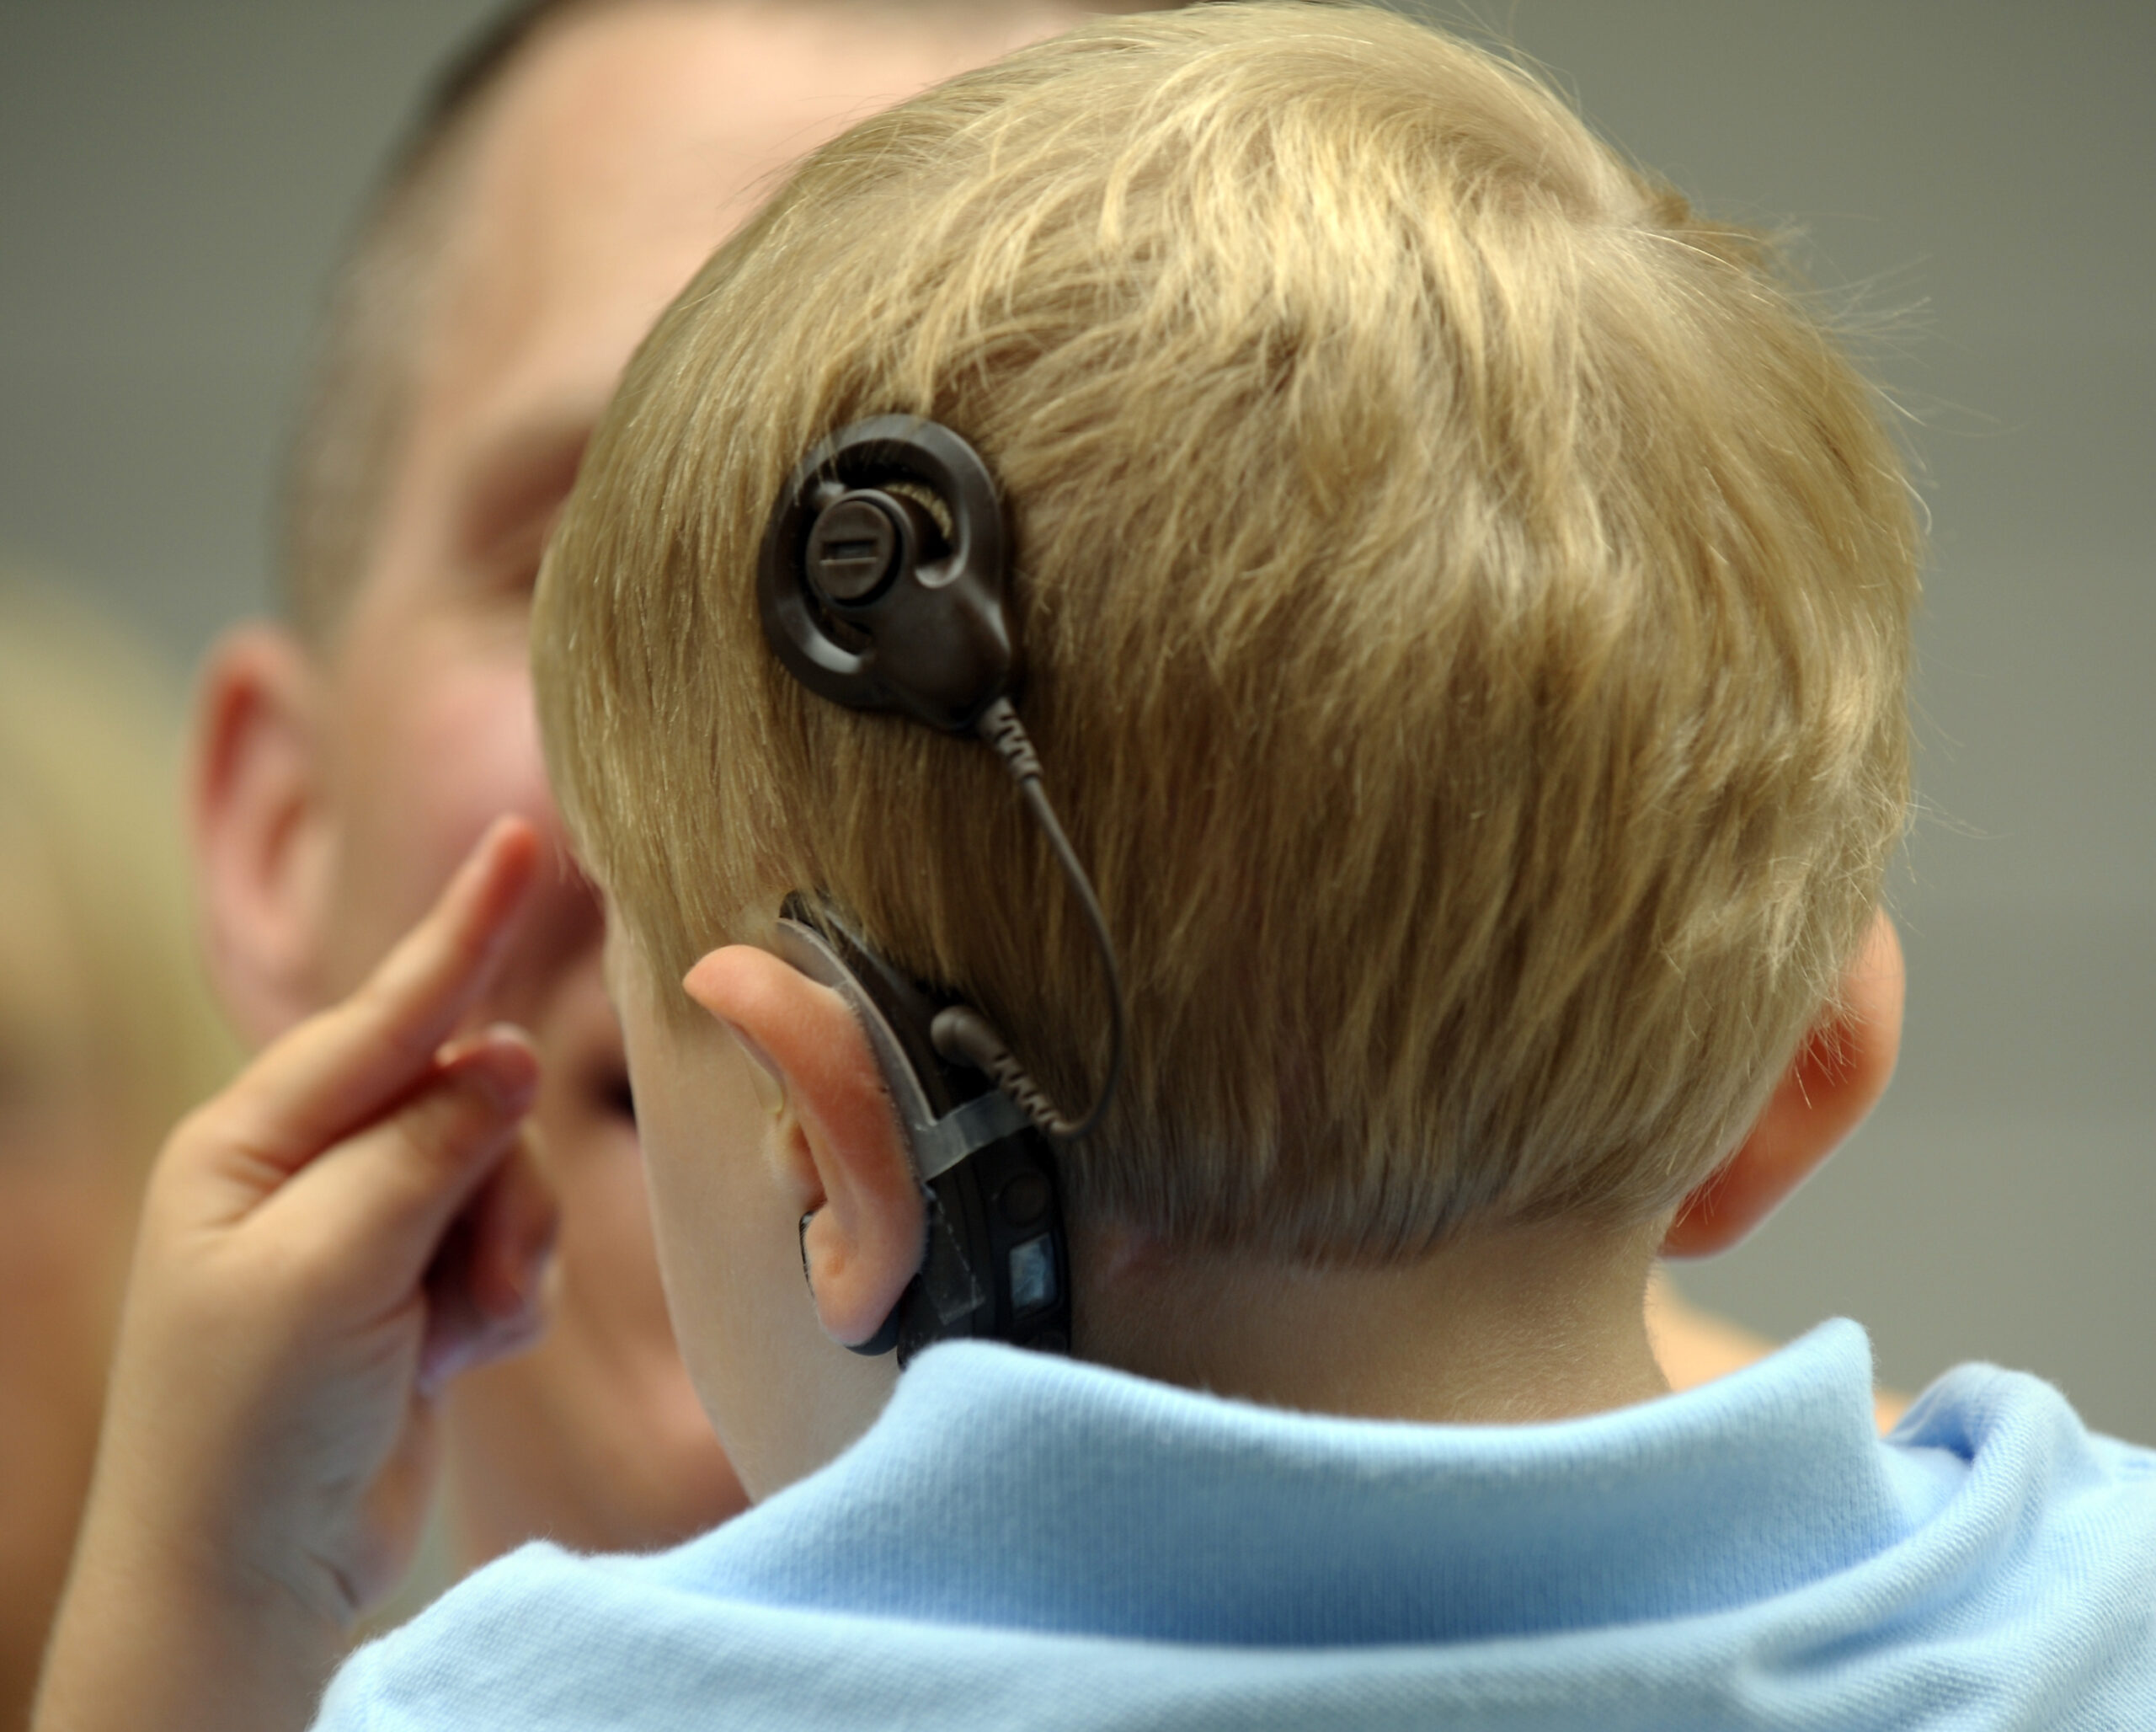 Boy with cochlear implant